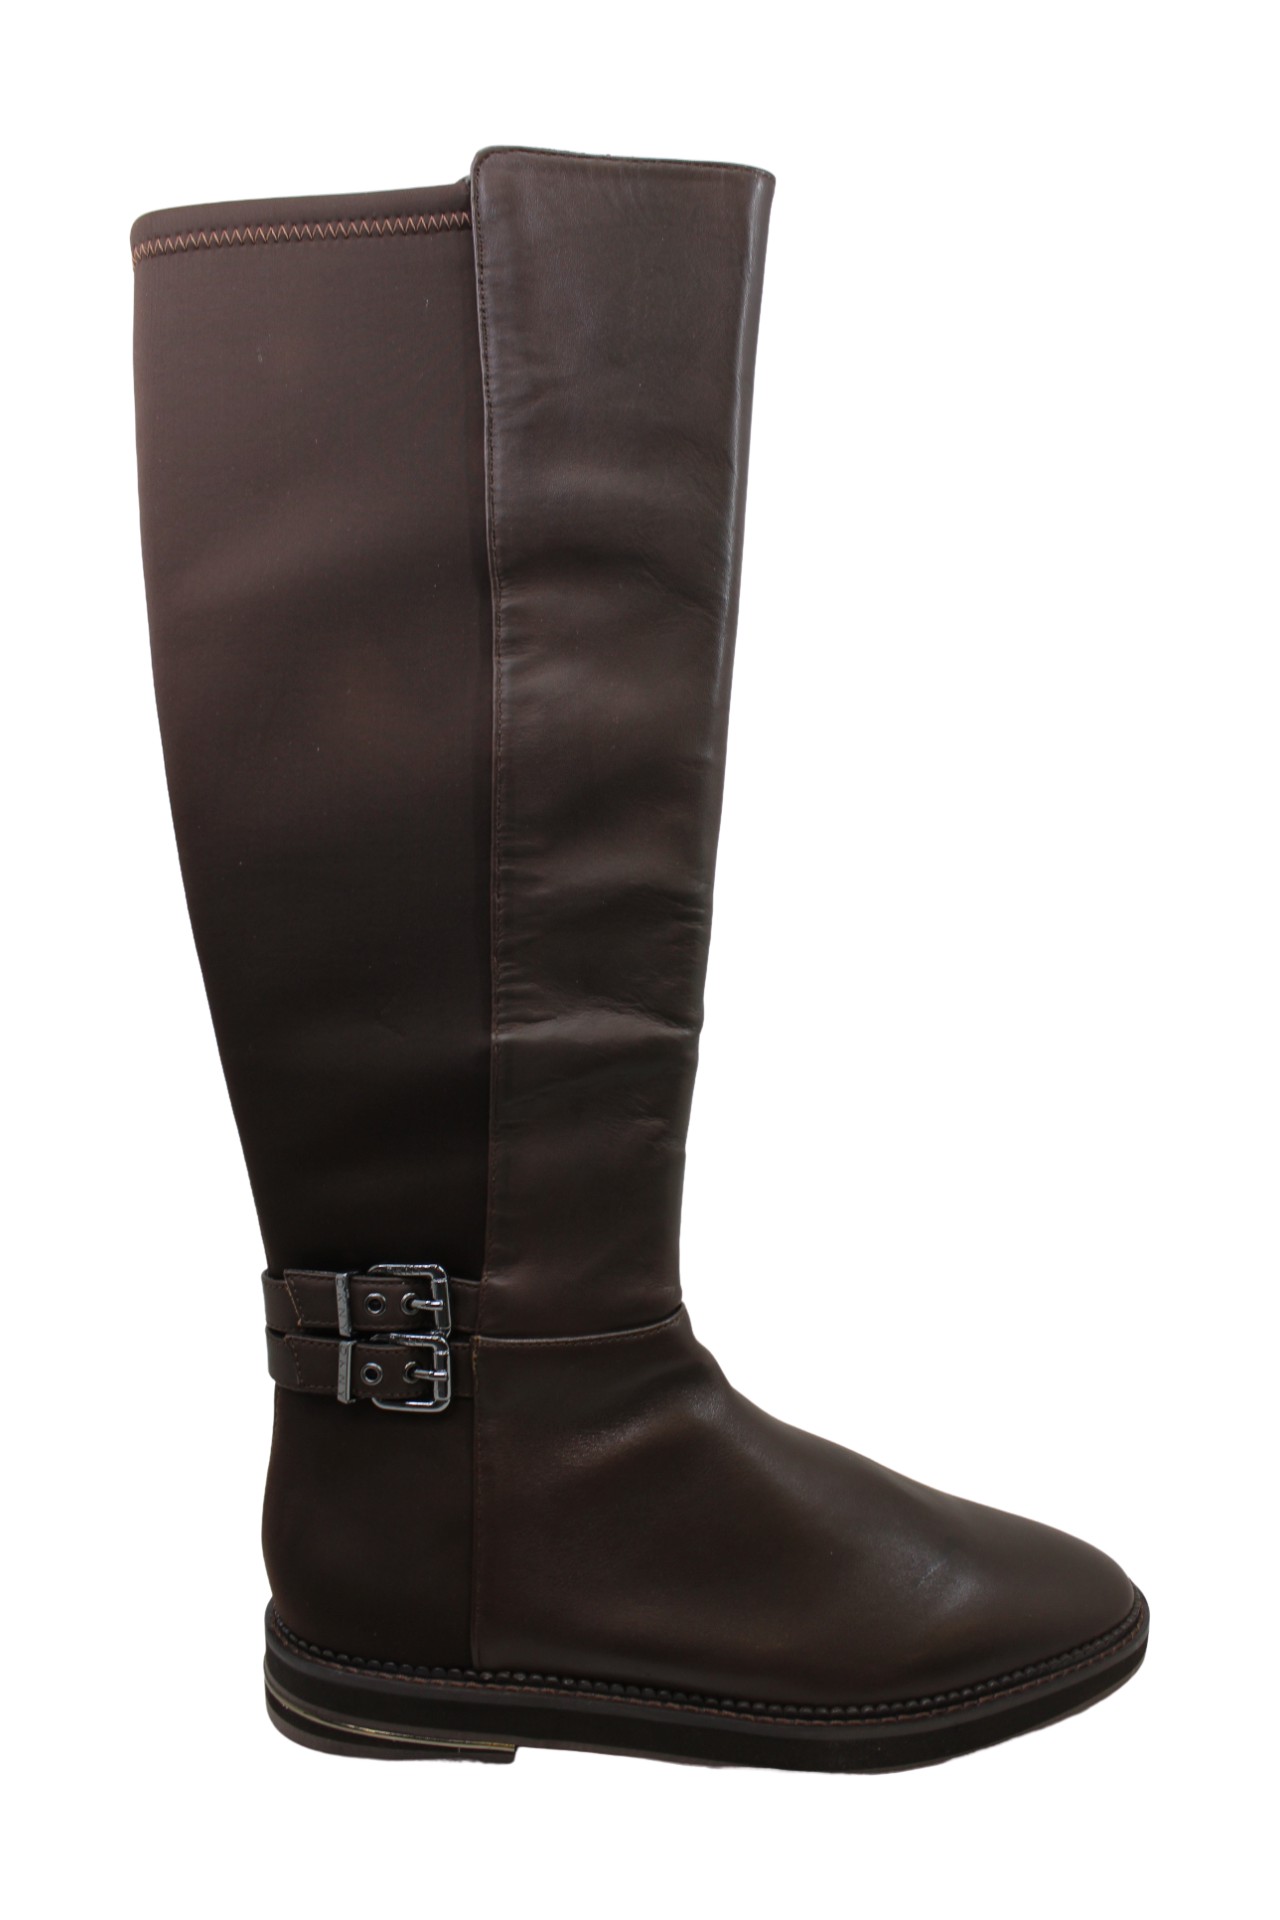 DKNY WOMEN'S SHOES lena Leather Closed Toe Knee High Fashion Boots $95. ...